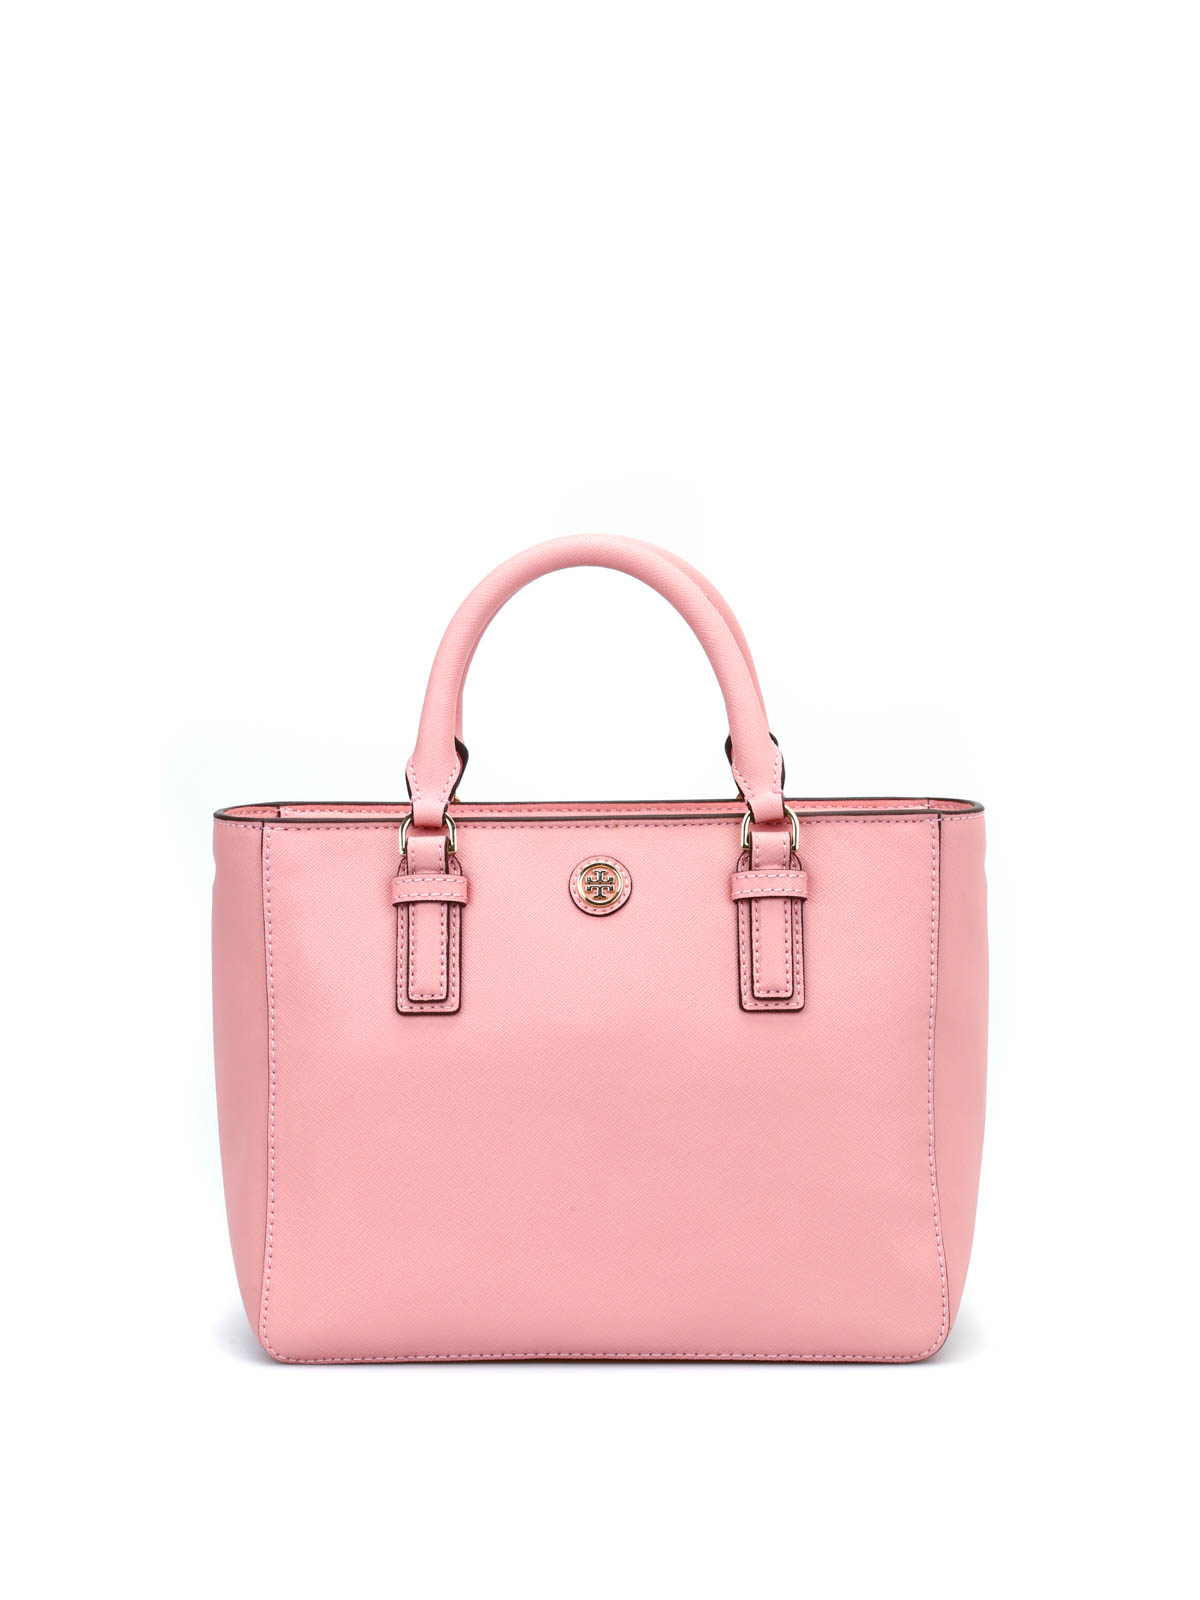 Tory Burch Pink Saffiano Leather Small Robinson Top Handle Bag